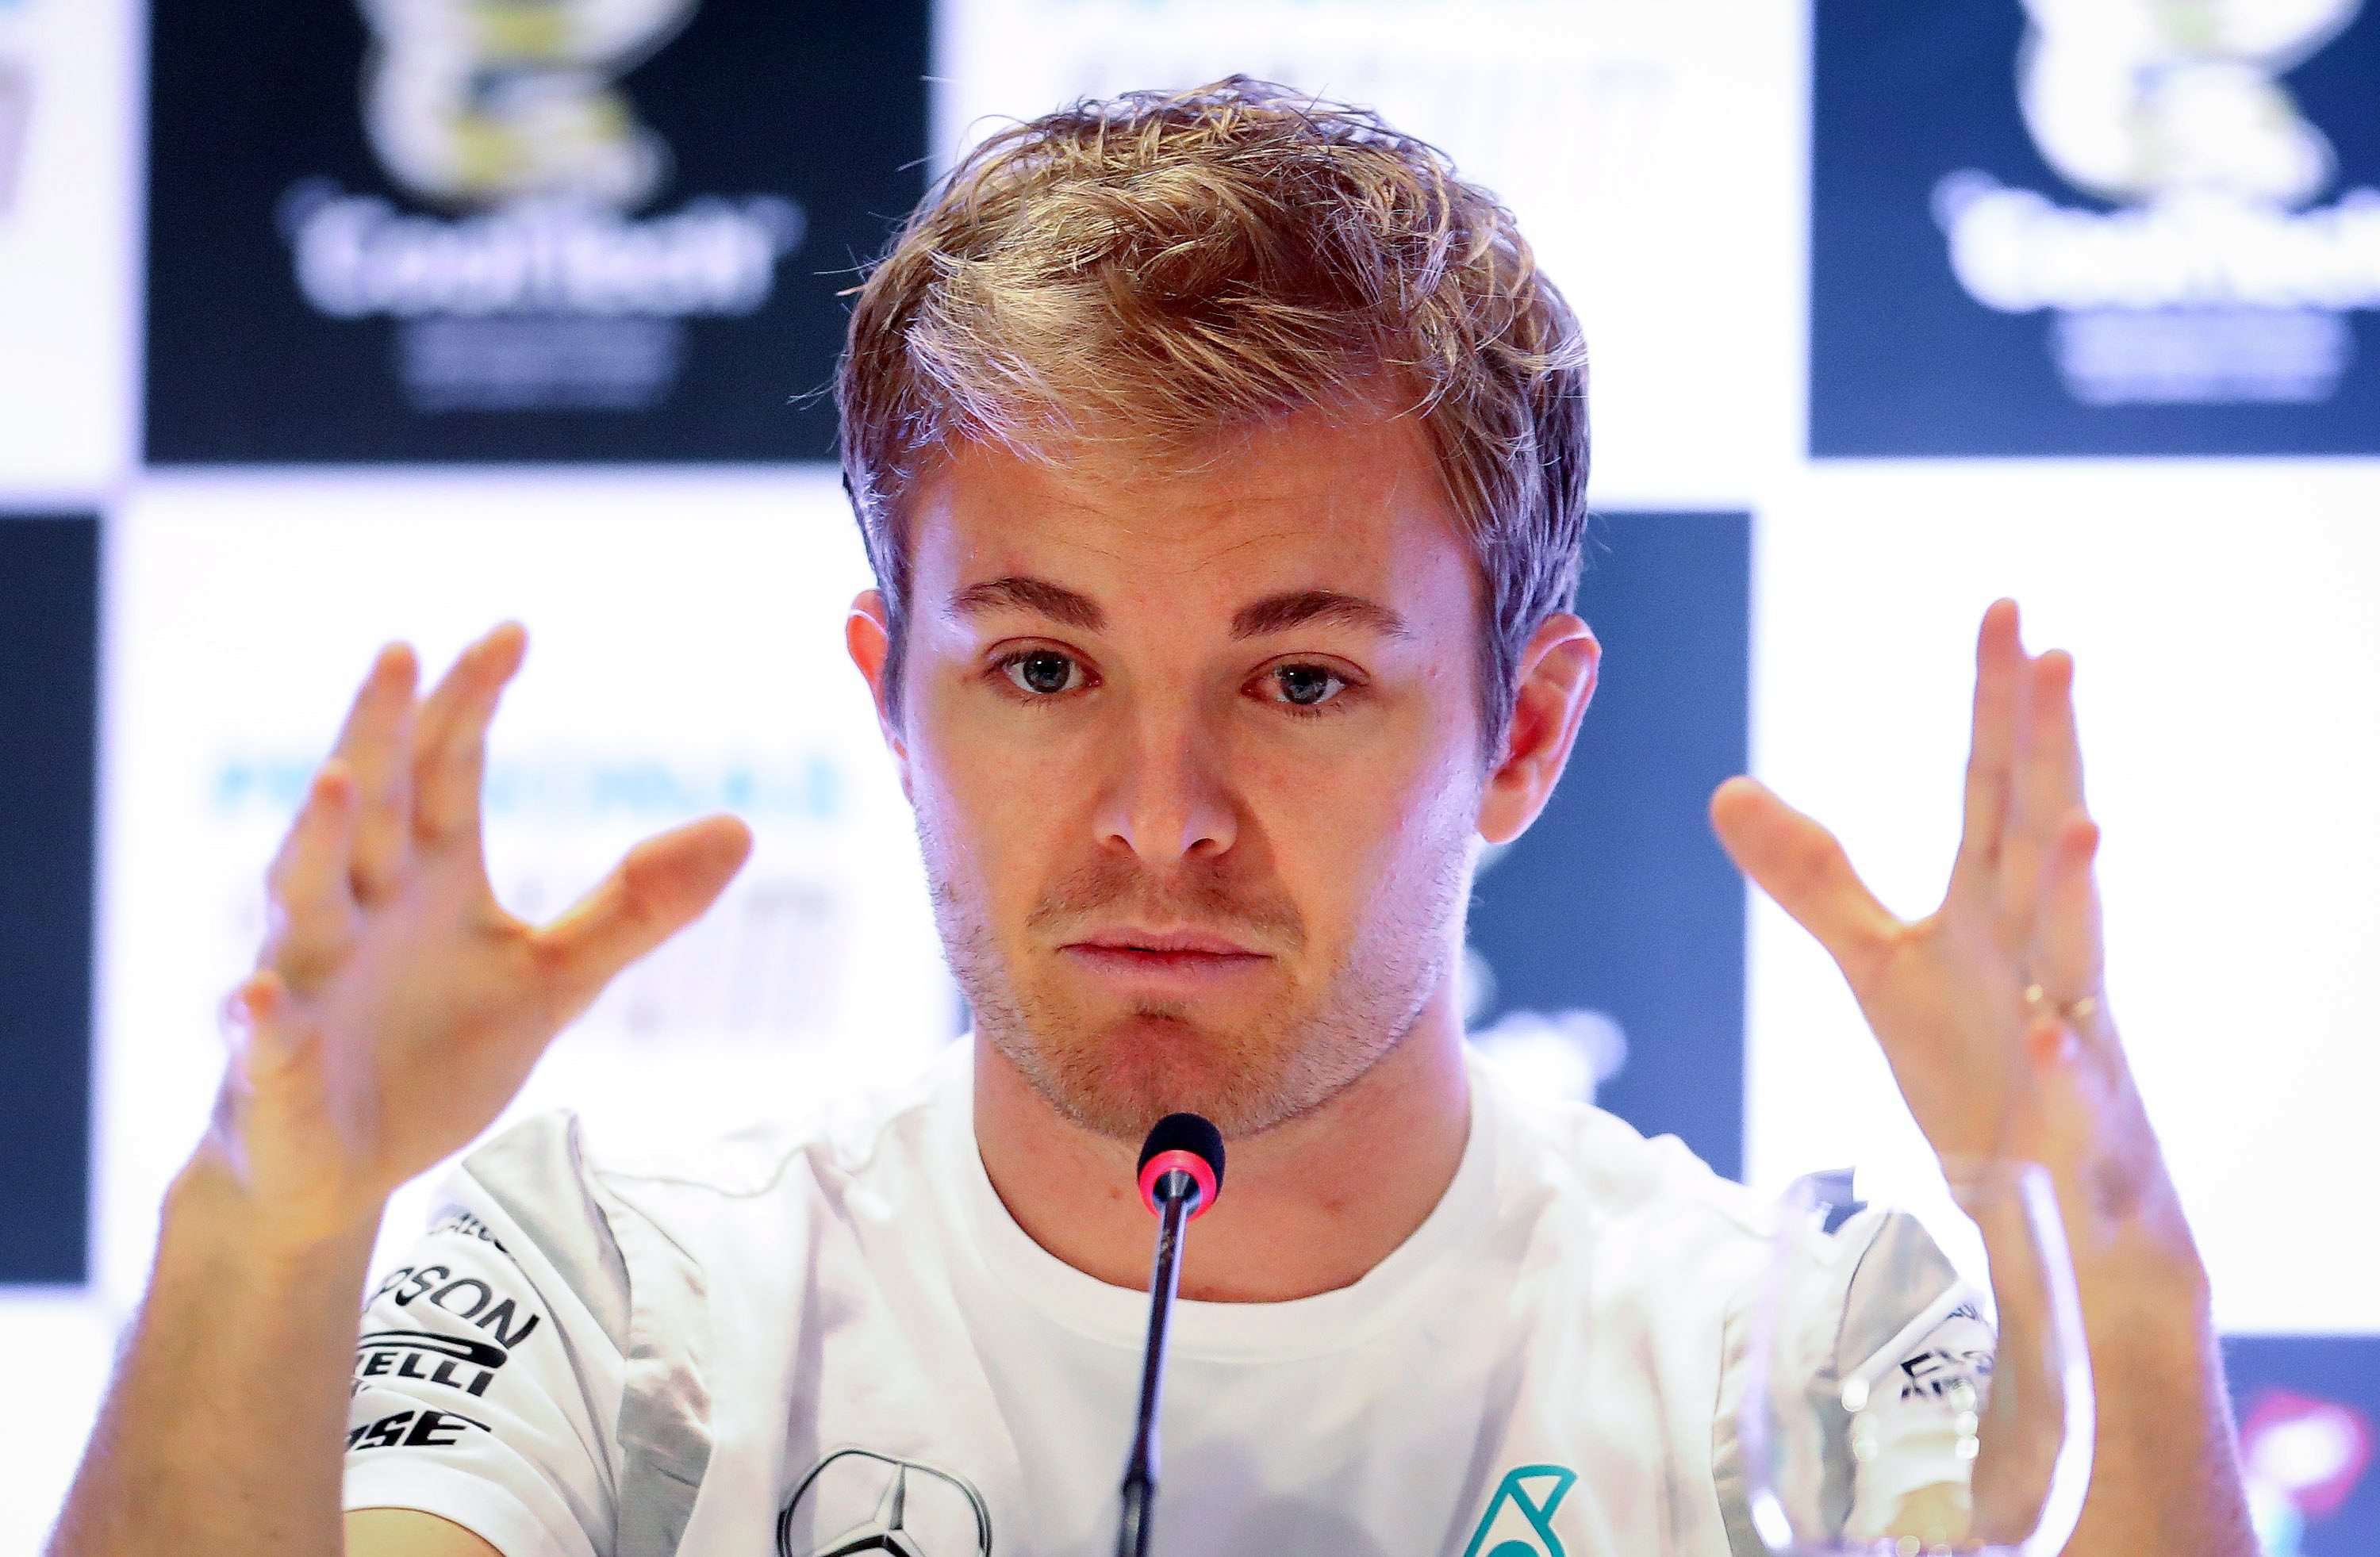 Germany’s Nico Rosberg knows that a win in Brazil will secure him the Formula One World Championship. Photo: EPA